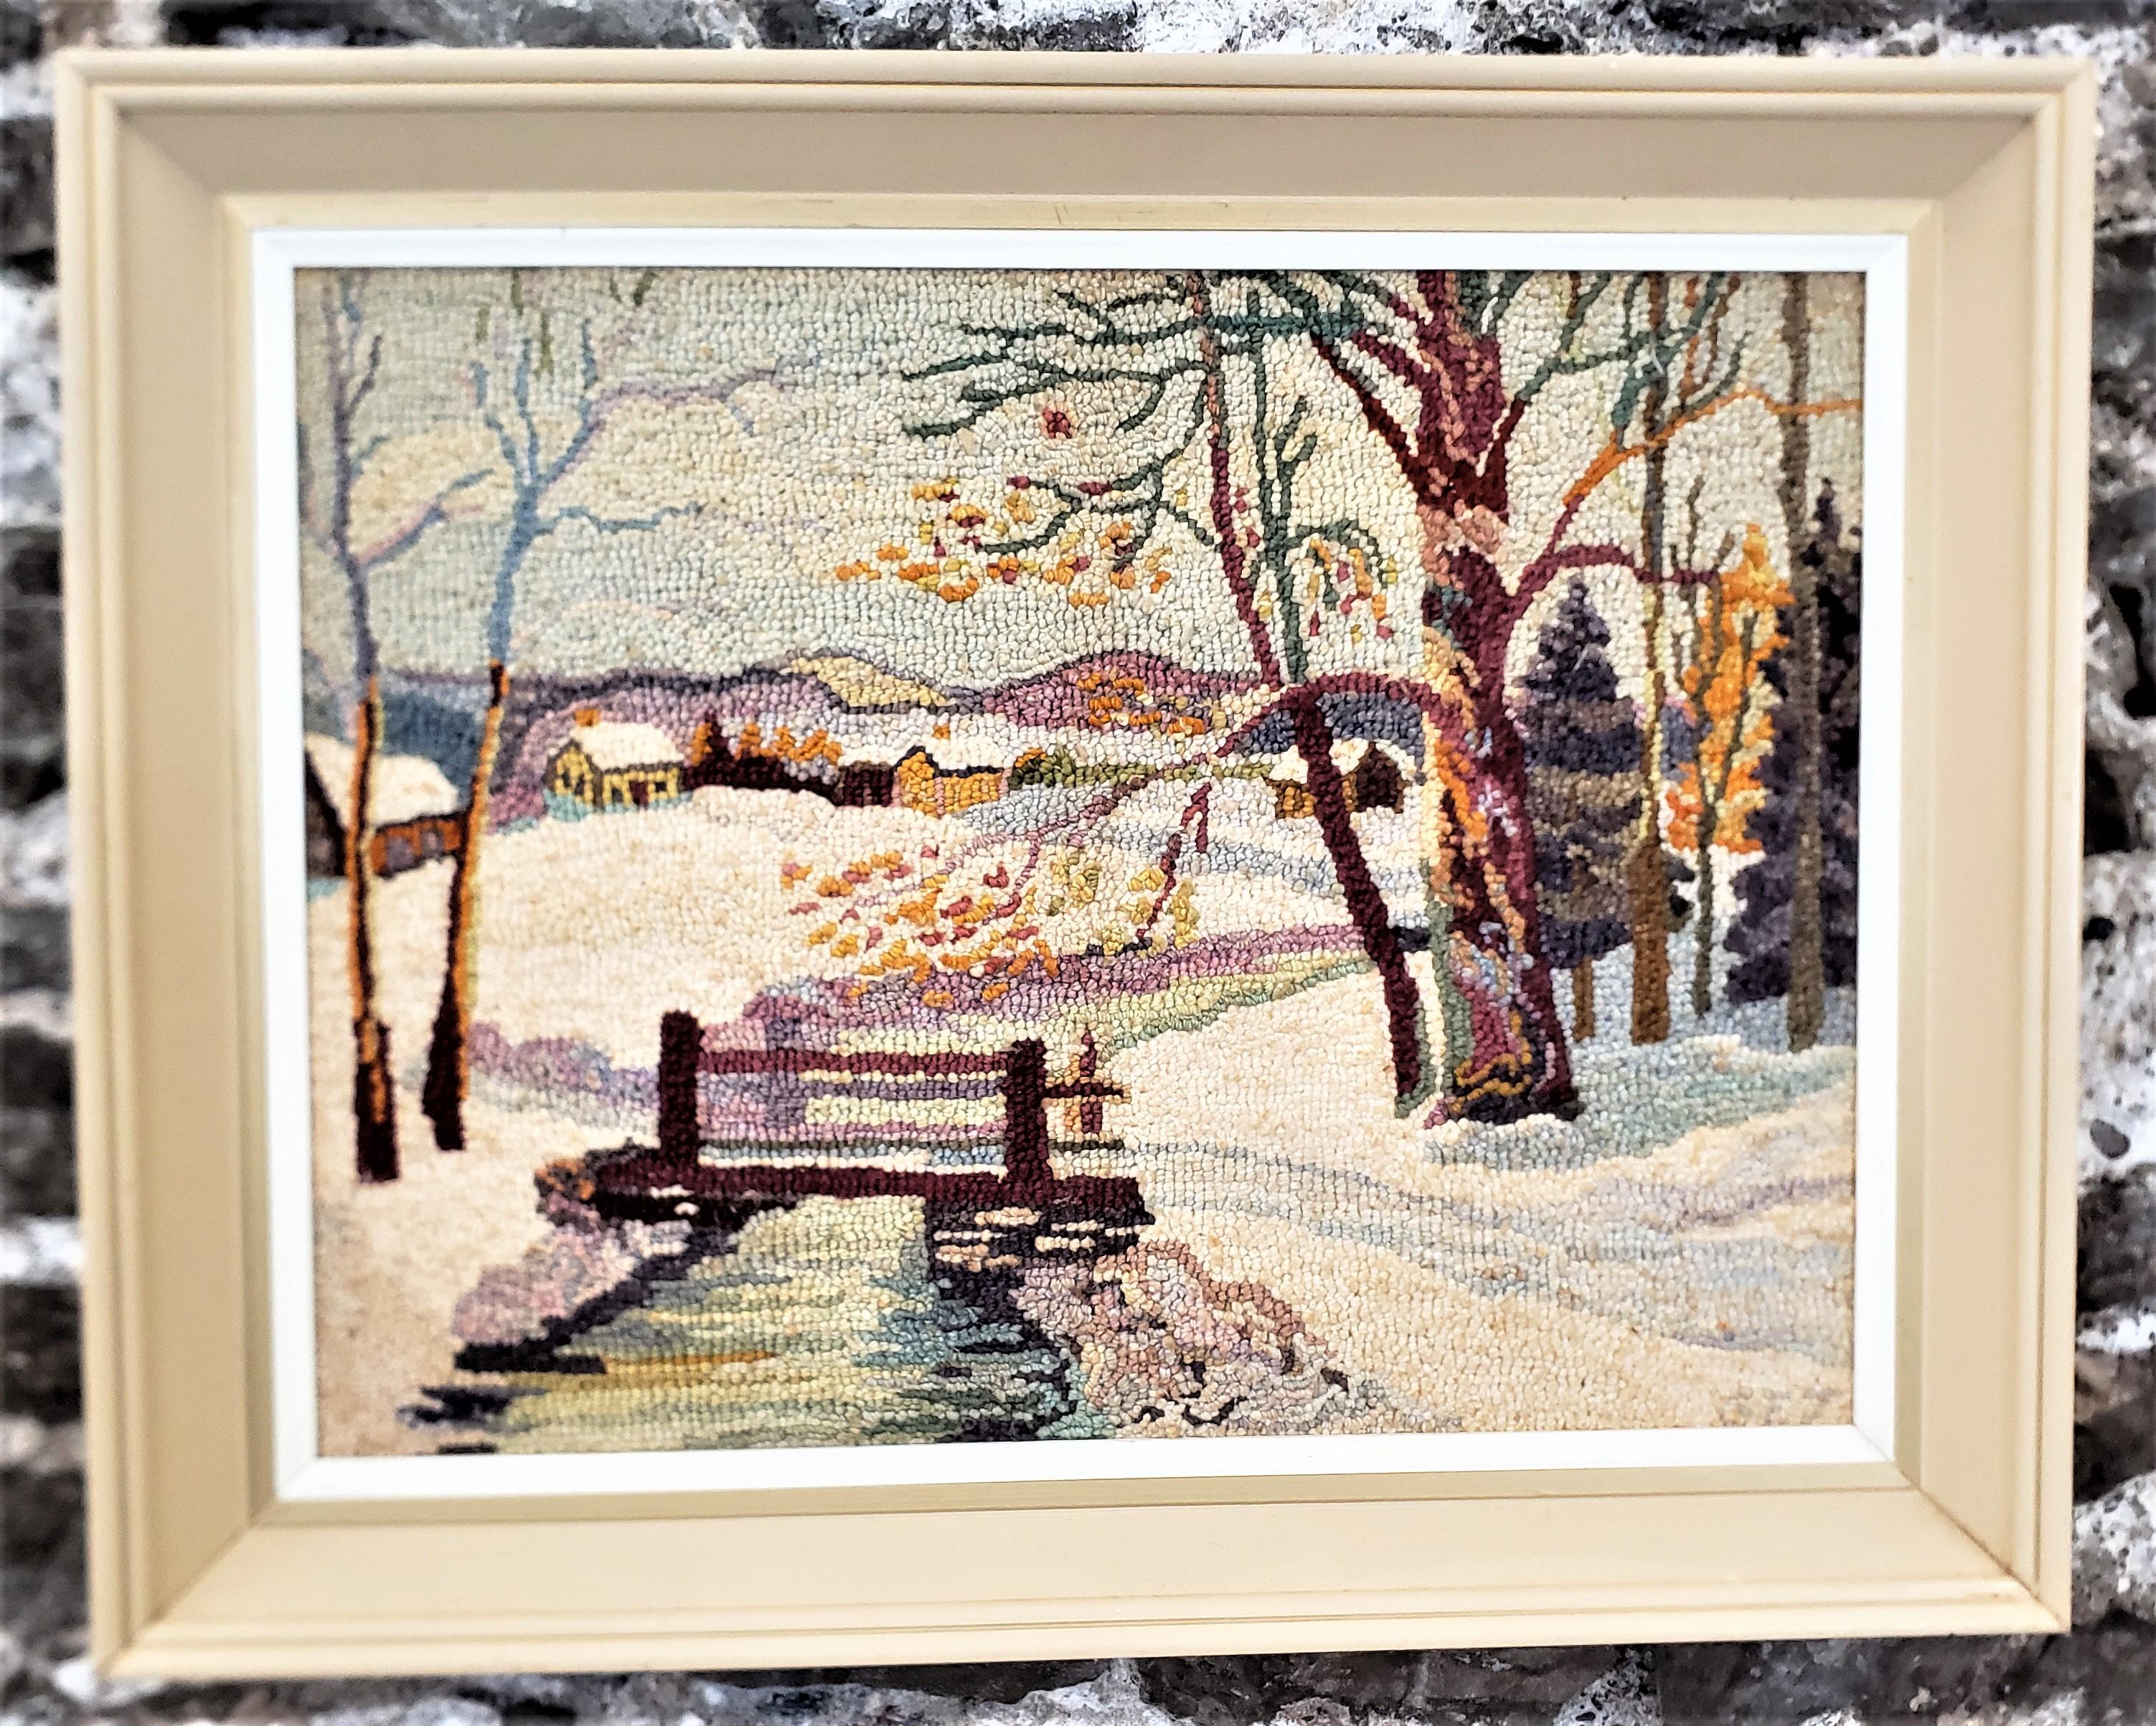 This framed hooked rug or mat was done by the well known George Edouard Tremblay of Quebec Canada in approximately 1940 in his period Folk Art style. The rug or mat is done with wool on burlap which has been mounted on masonite board and framed in a